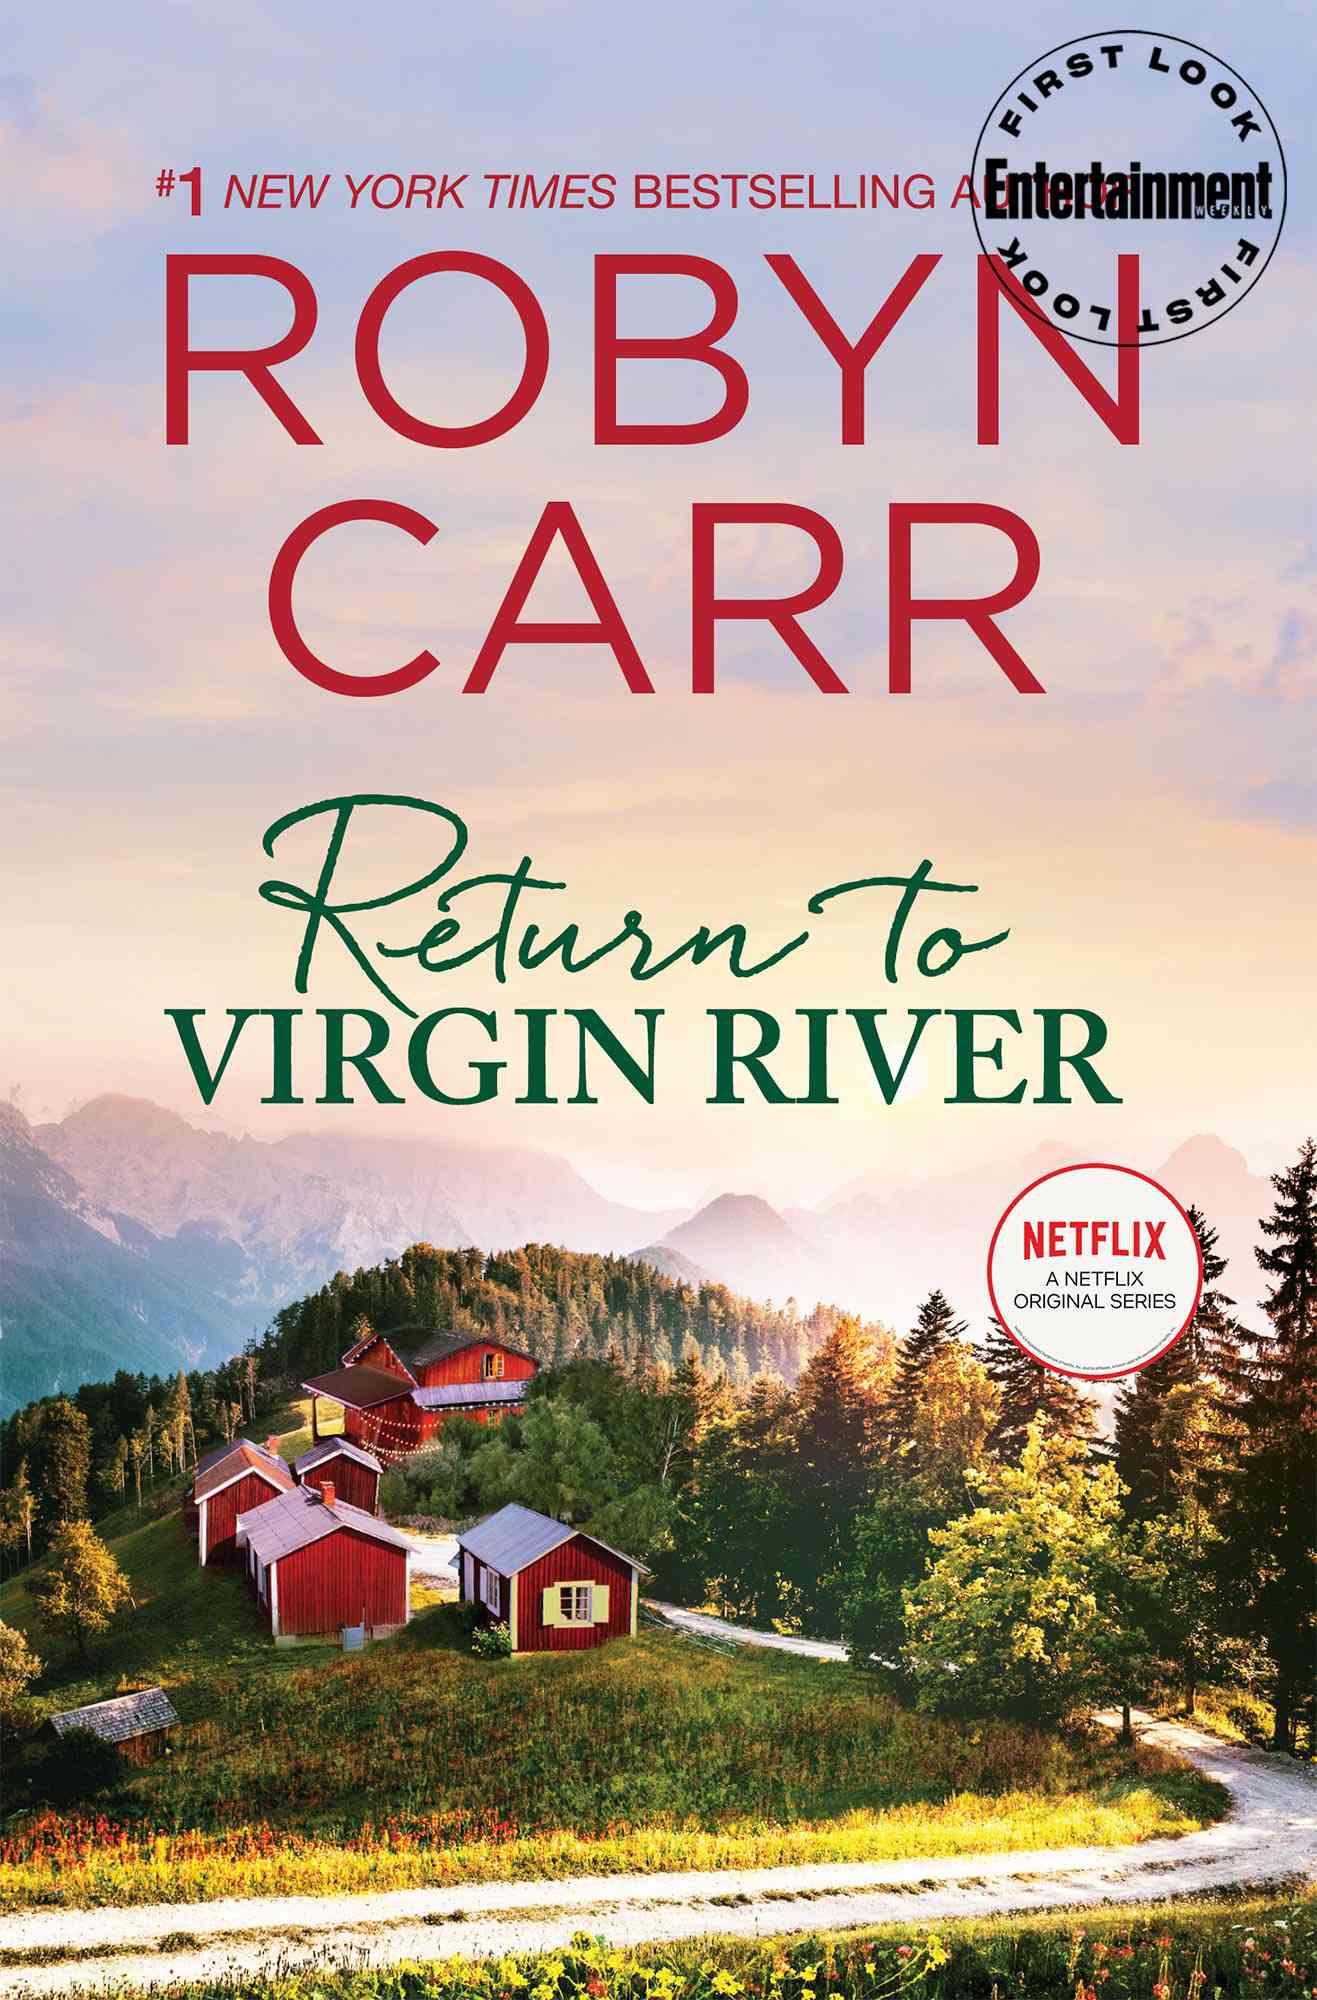 Return To Virgin River by Robyn Carr